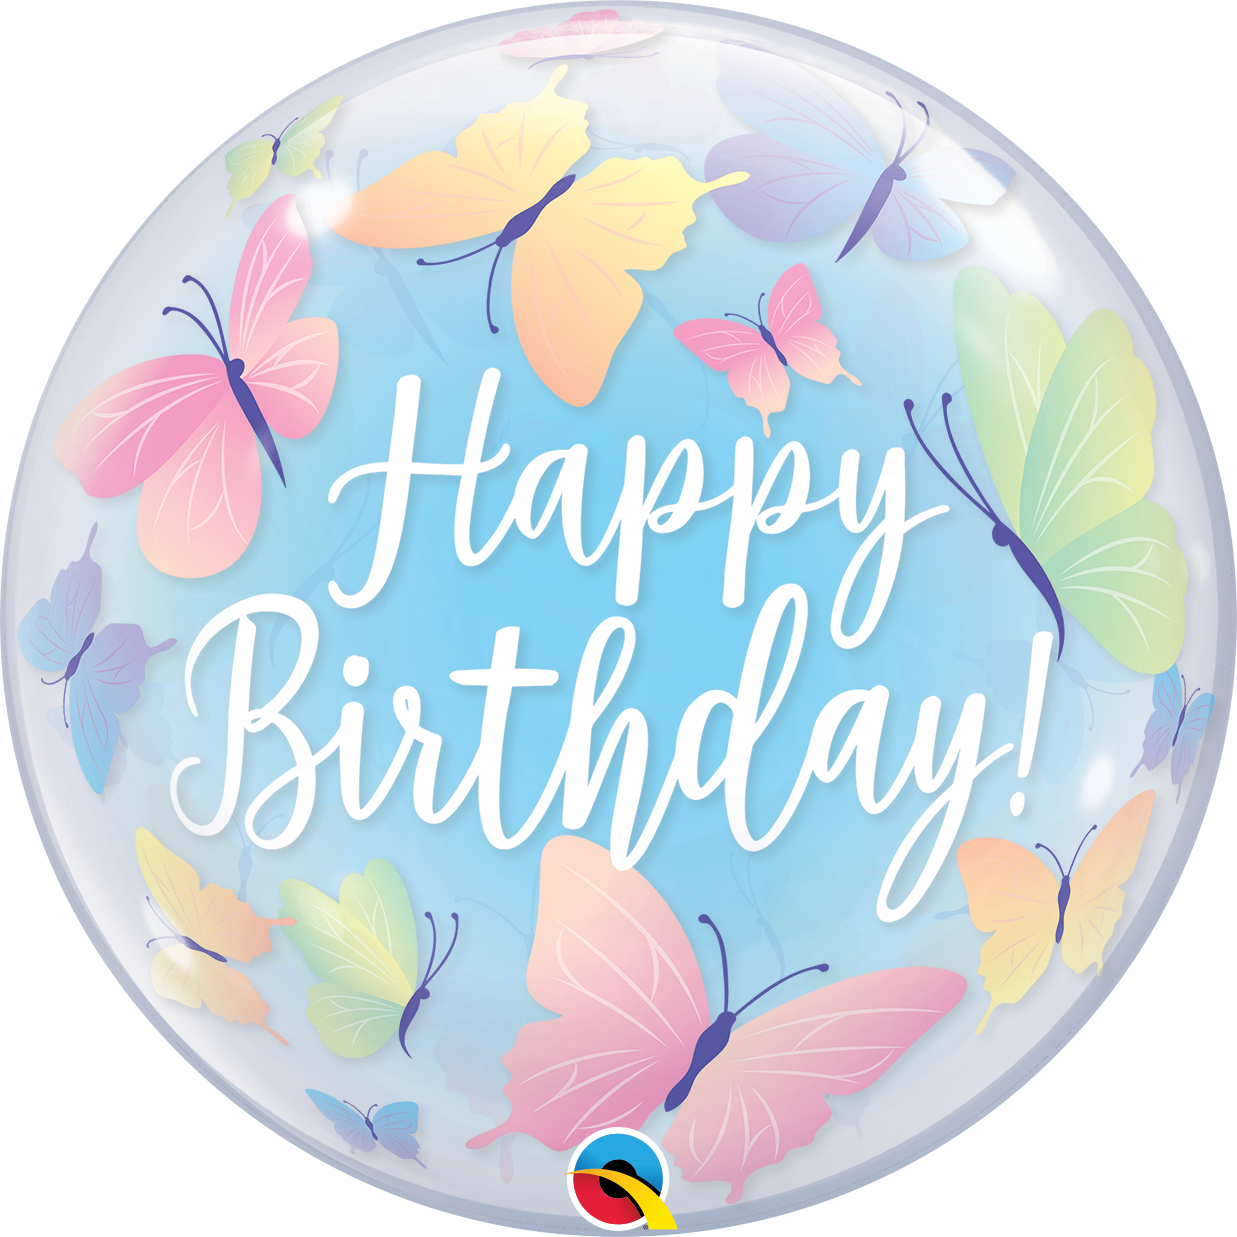 CTI Balloons Foil Balloon 414451 Happy Birthday Flowers/butterfly 17 Multicolor